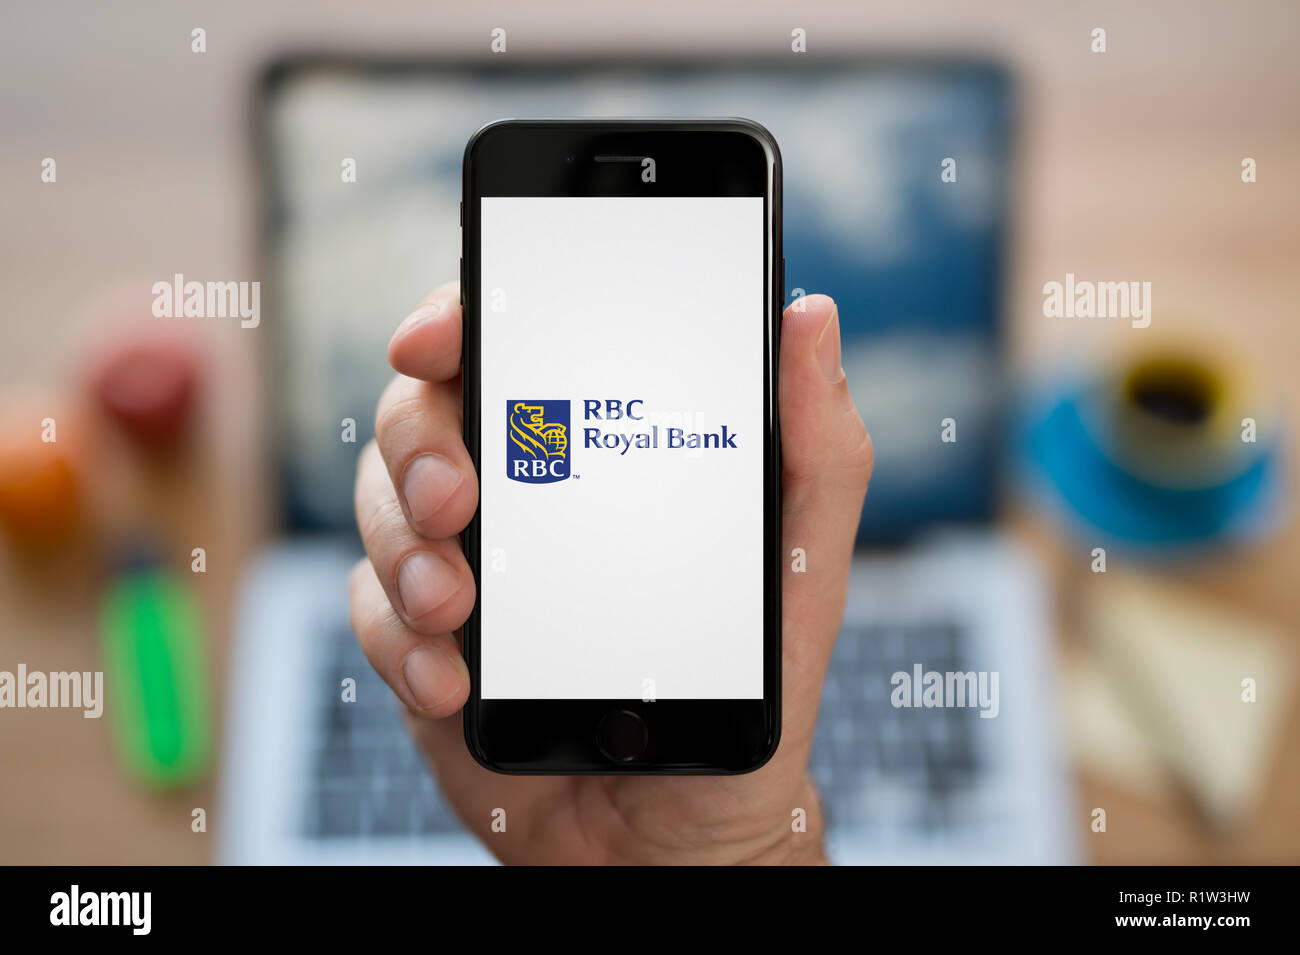 A man looks at his iPhone which displays the RBC Royal Bank logo, while sat at his computer desk (Editorial use only). Stock Photo